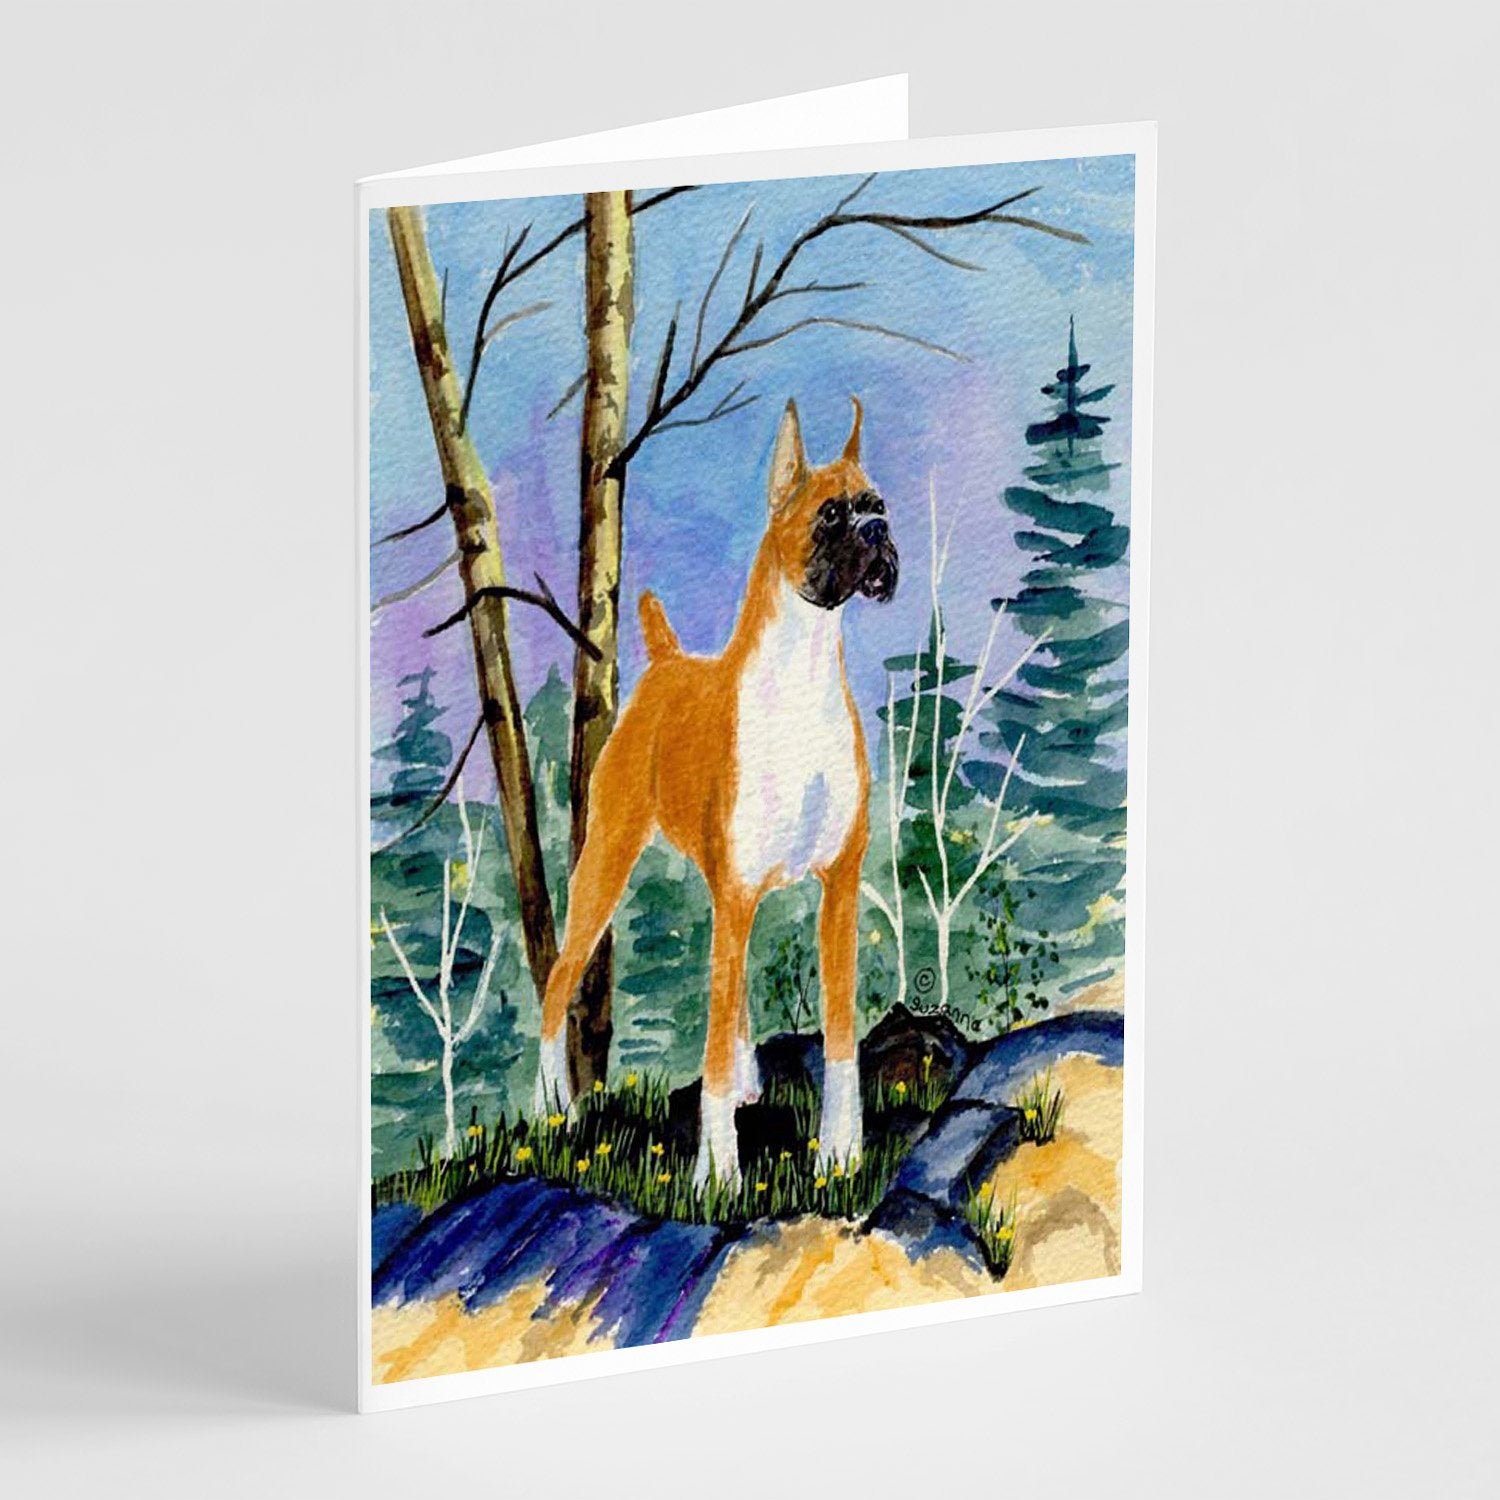 Buy this Boxer Greeting Cards and Envelopes Pack of 8